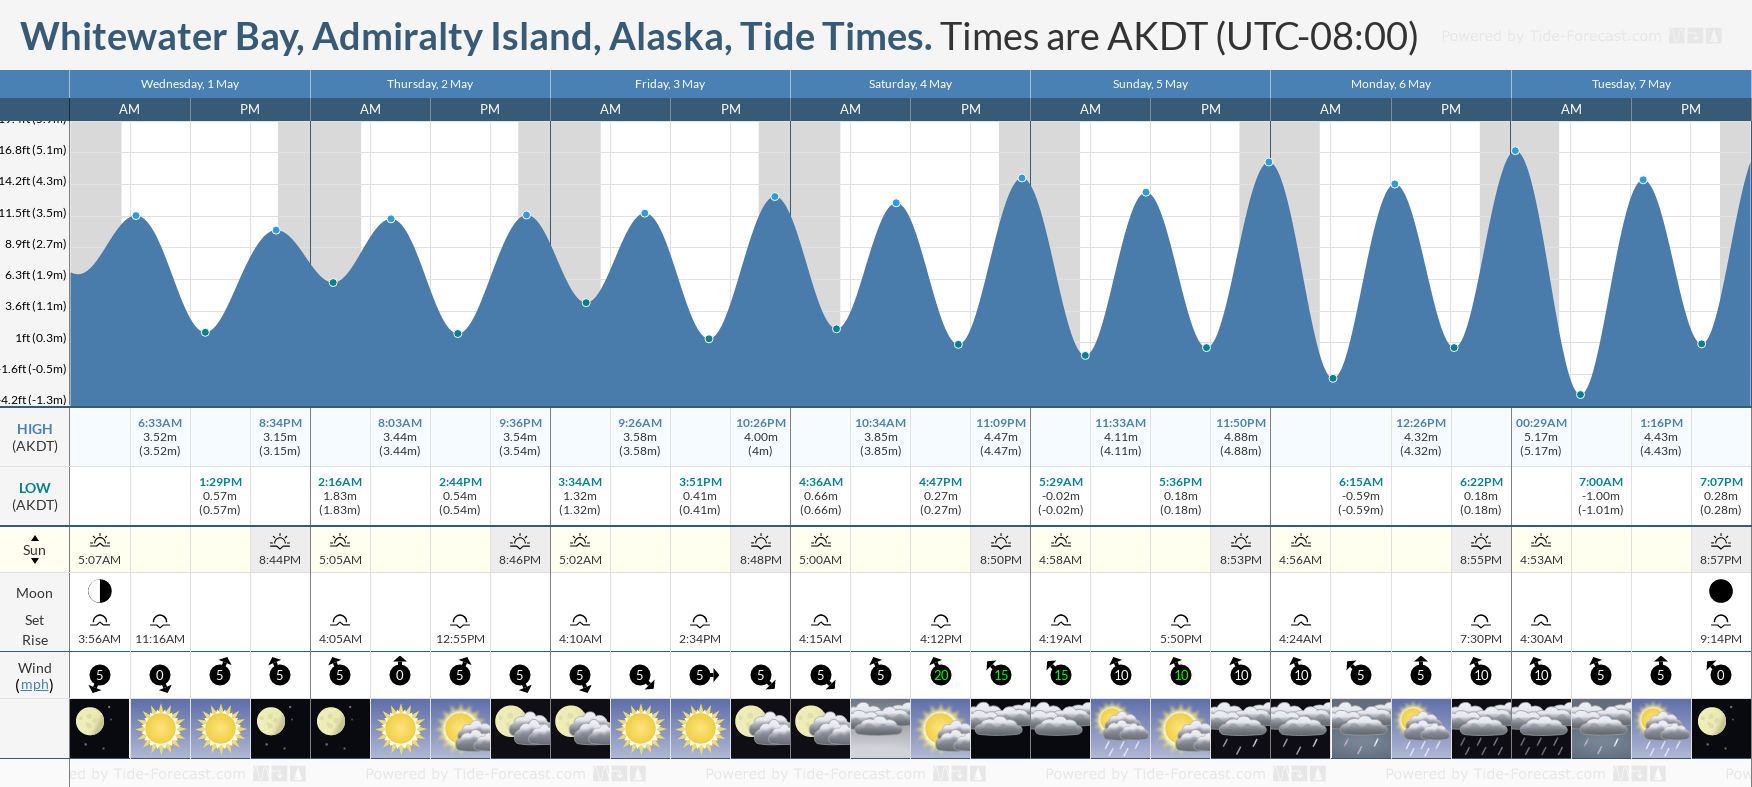 Whitewater Bay, Admiralty Island, Alaska Tide Chart including high and low tide tide times for the next 7 days